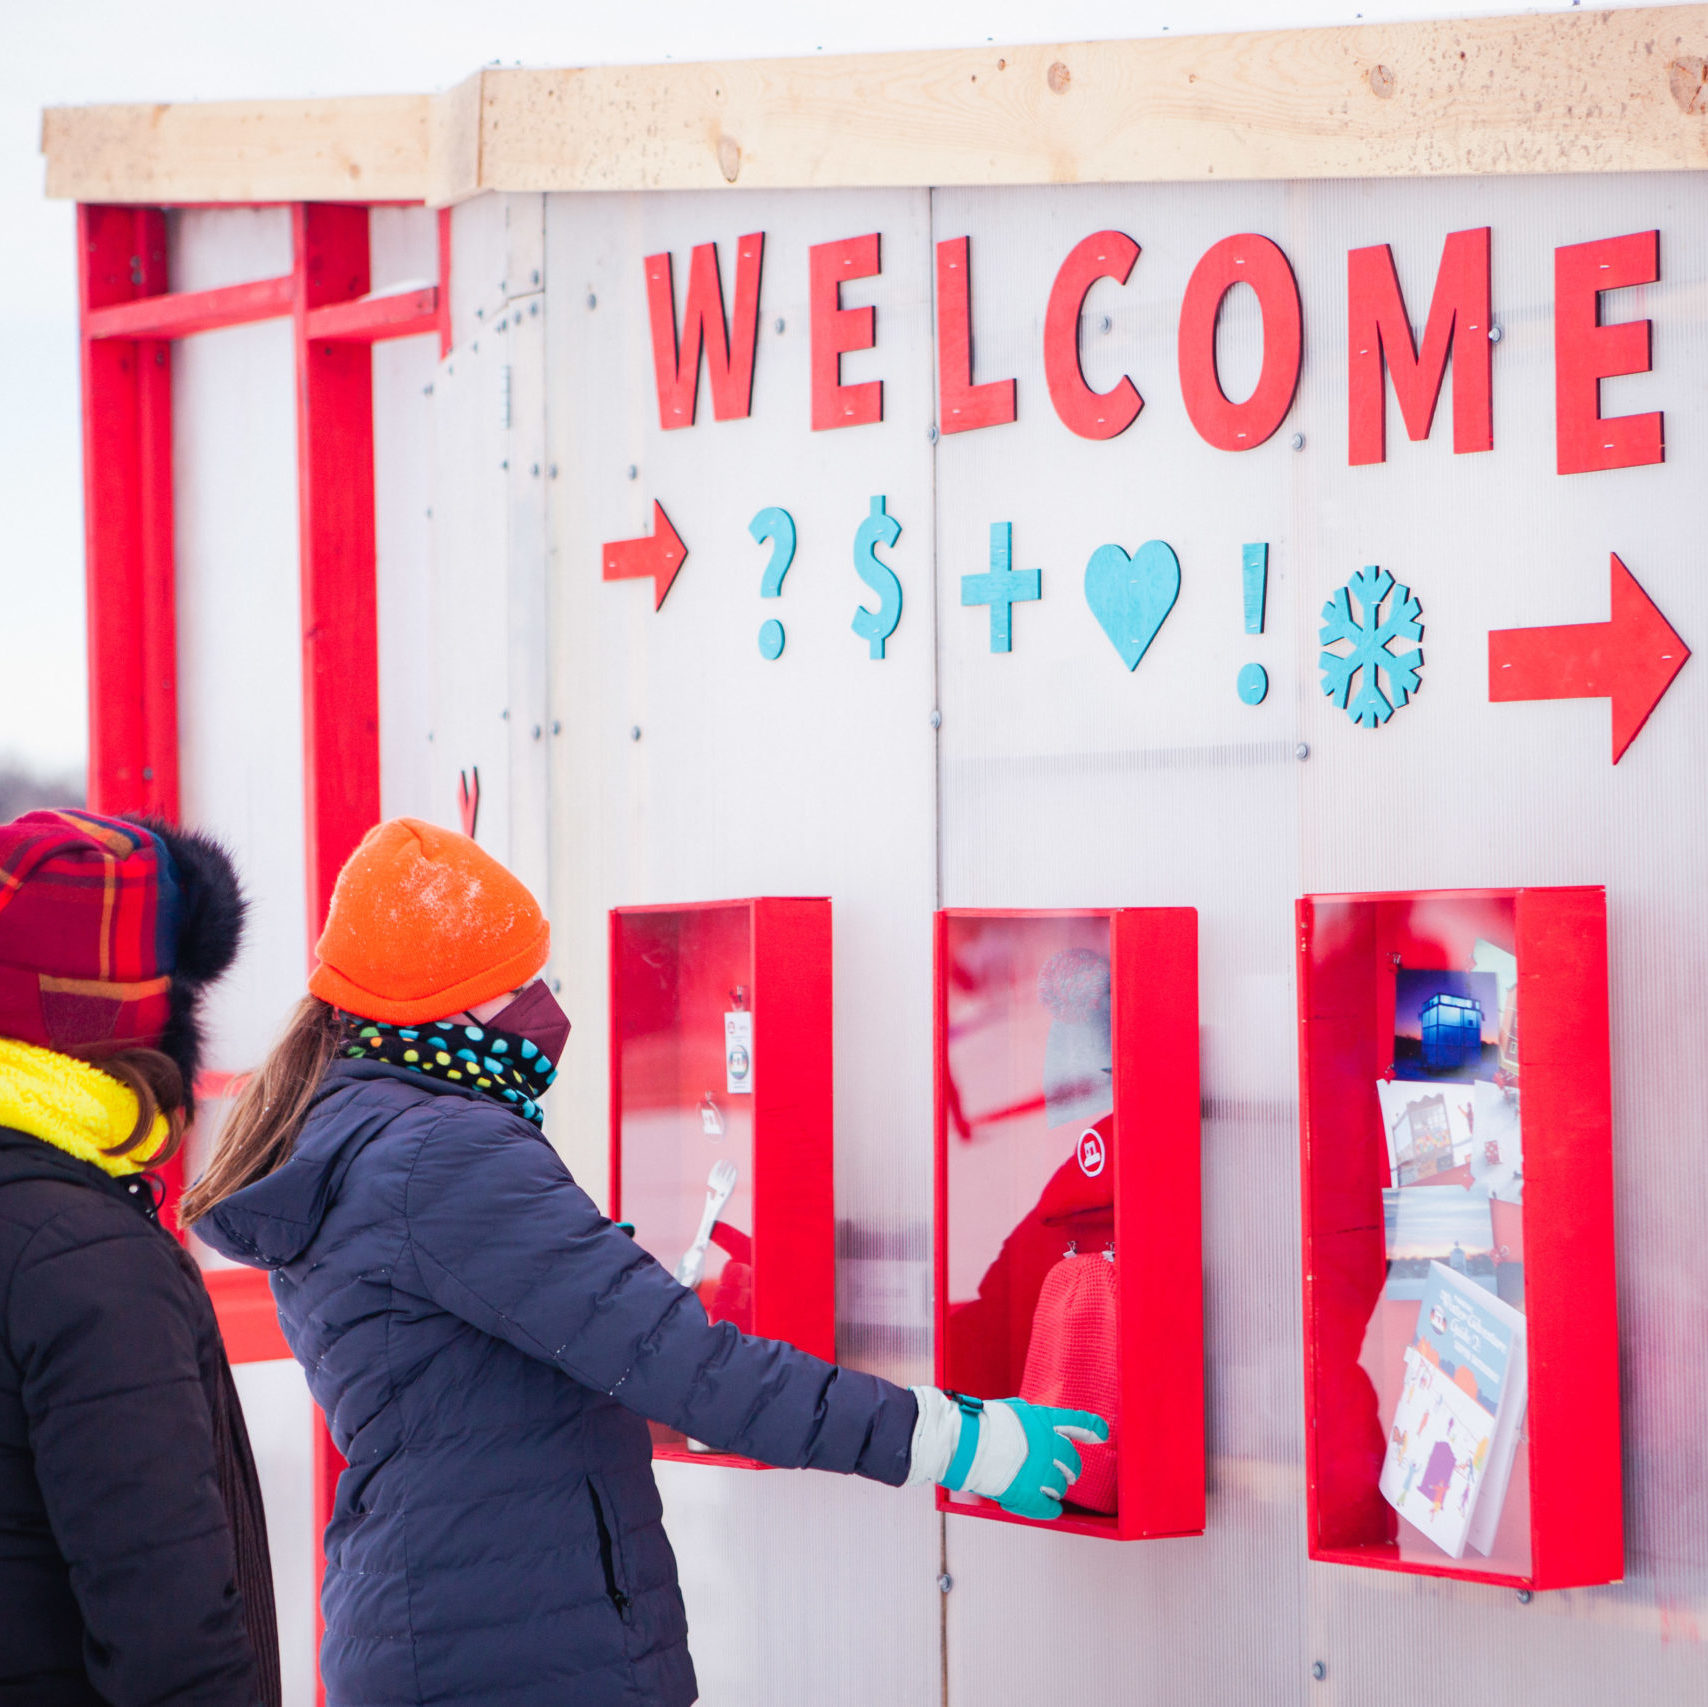 two people look at boxes containing merchandise. "Welcome" is spelled out in giant red letters.